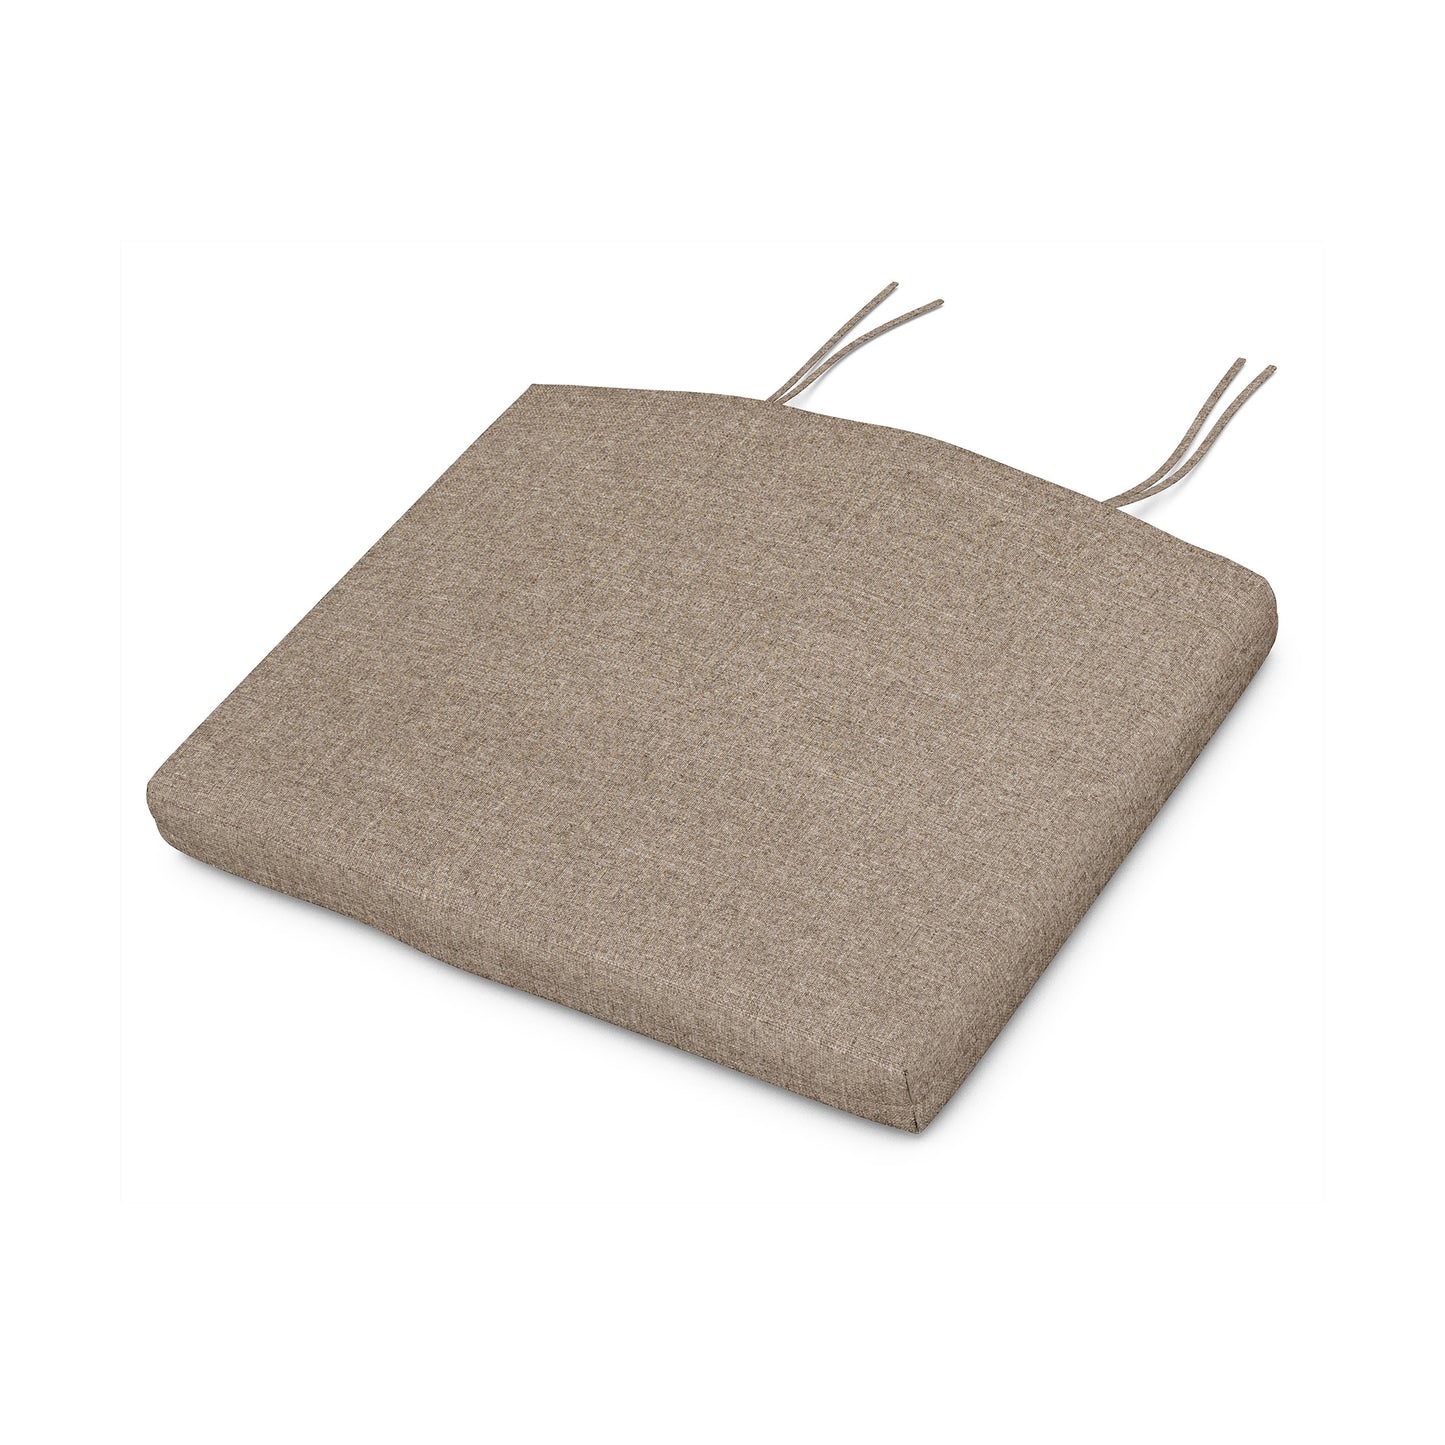 A beige POLYWOOD XPWS0003 - Seat Cushion, made with weather-resistant upholstery fabric, providing comfort and durability, placed on a white background.